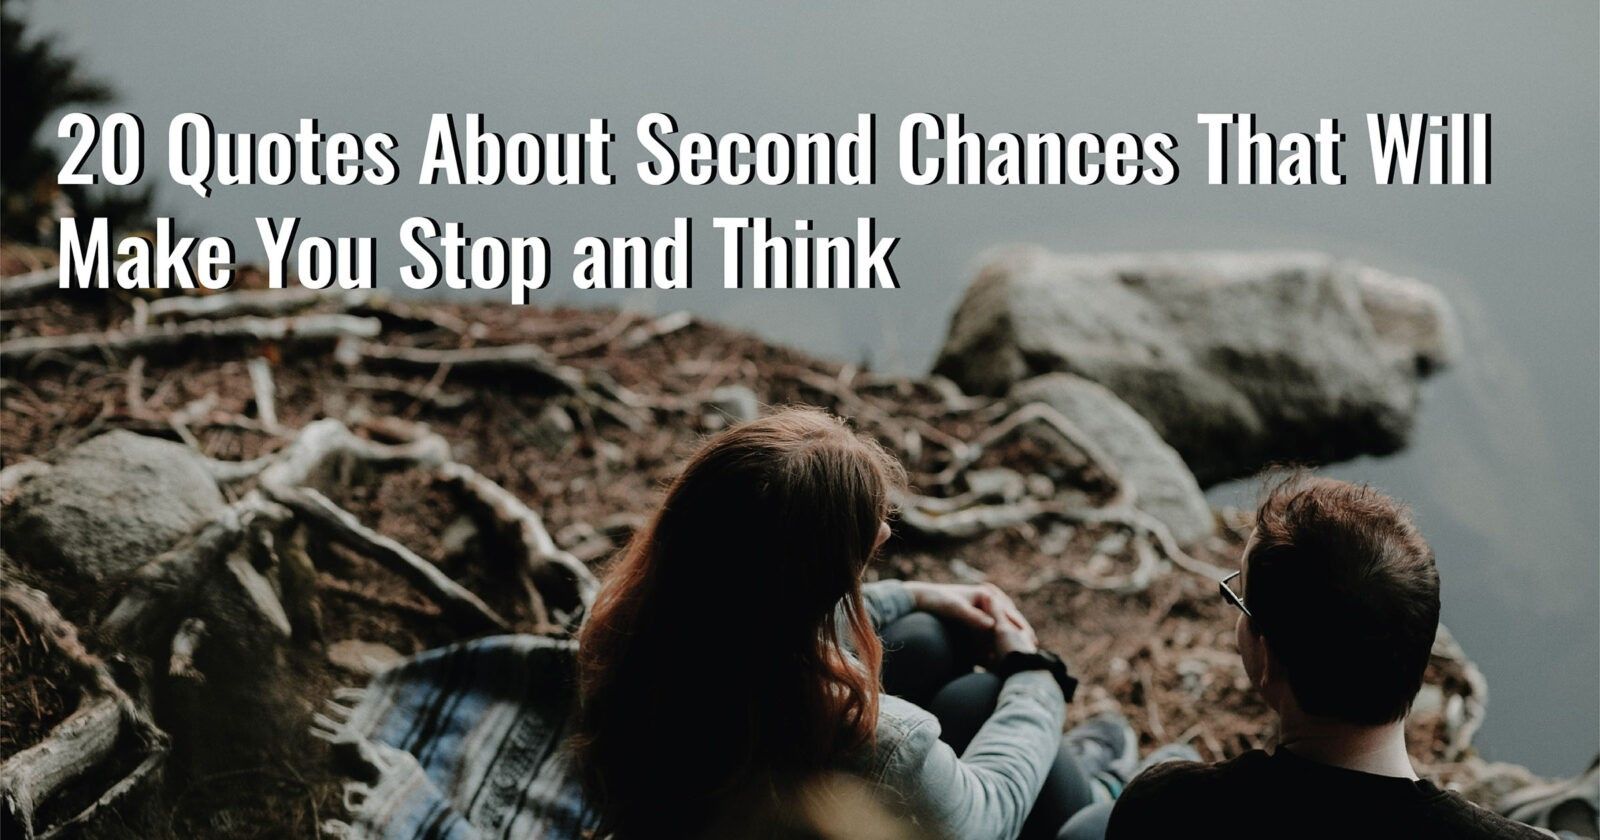 Second Chance Quotes About Relationships